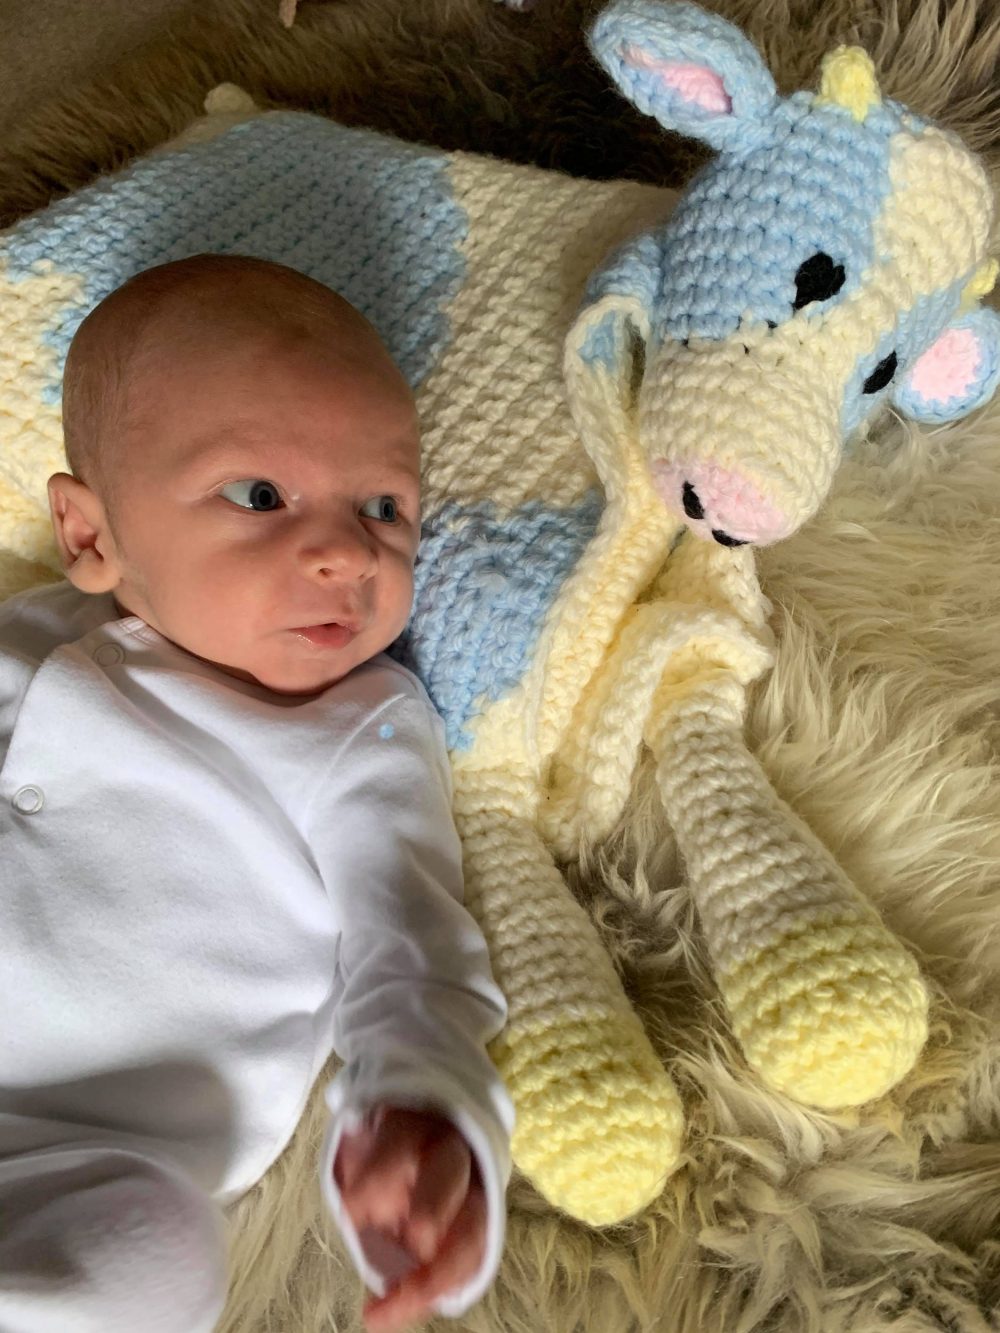 Baby Frederick with a knitted cow | Agriculture News UK